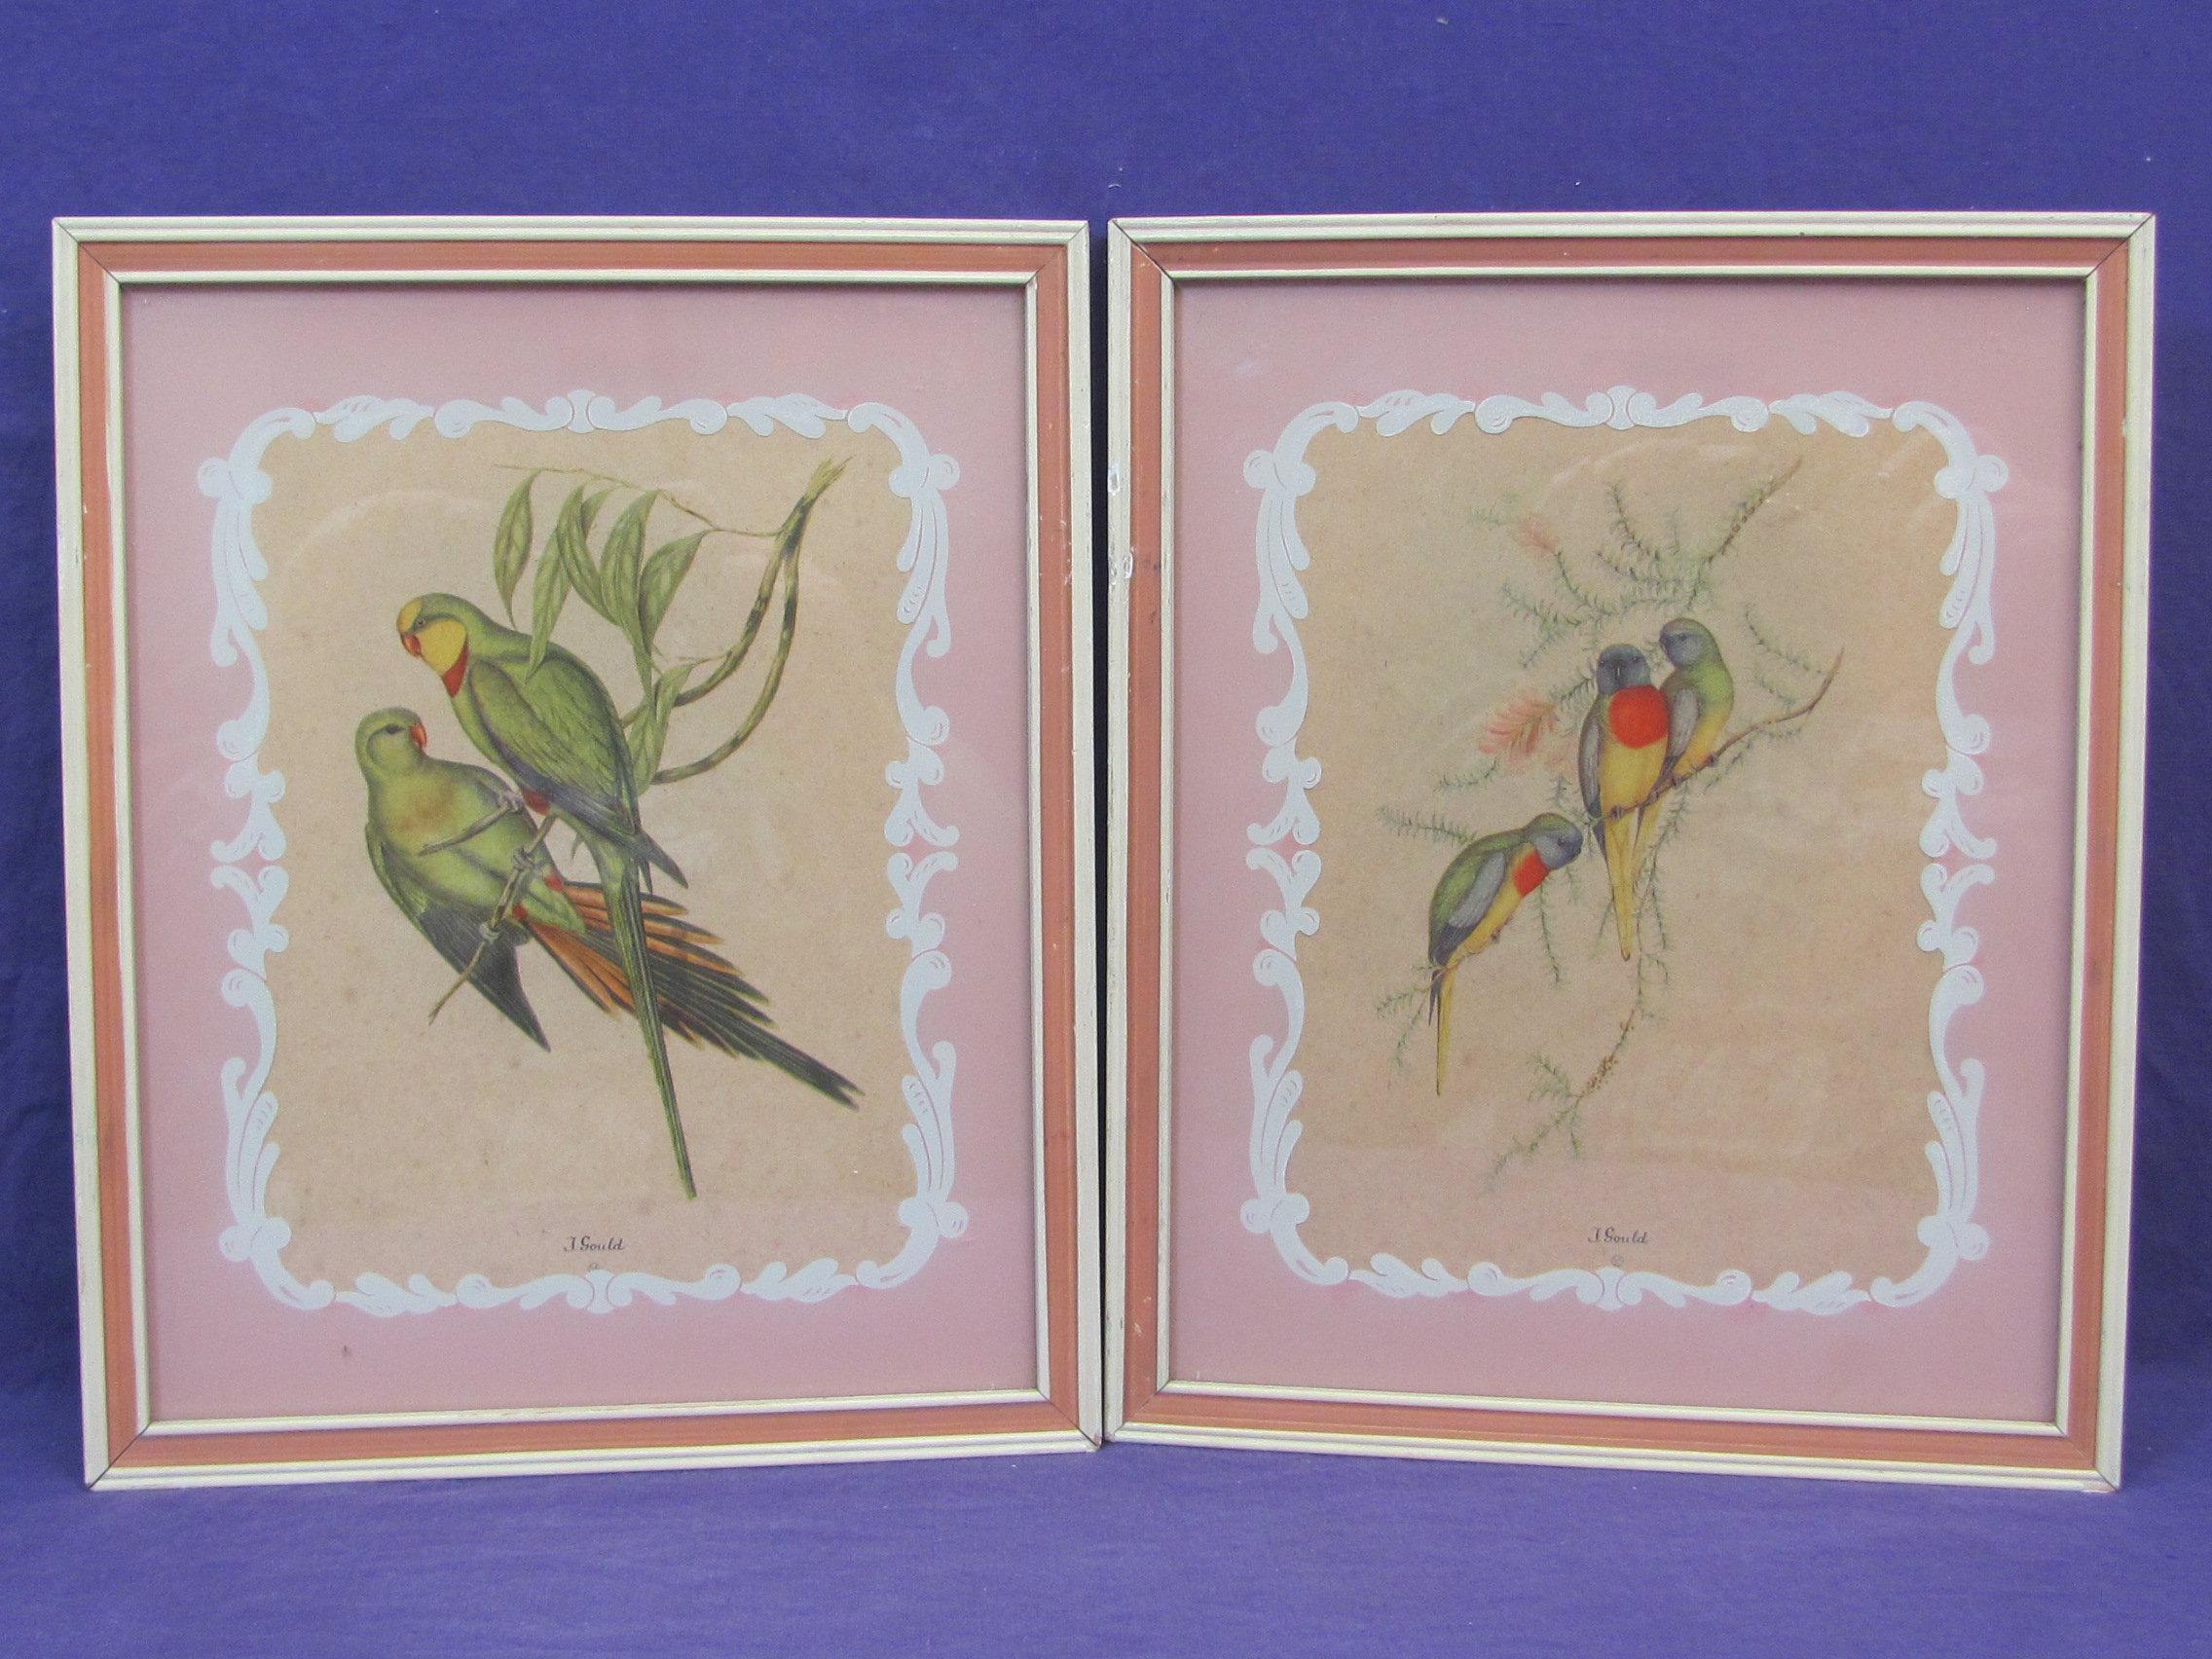 2 Framed Bird Prints by John Gould – Glass is Reverse Painted – Wood Frames are 10 3/4” x 8 3/4”